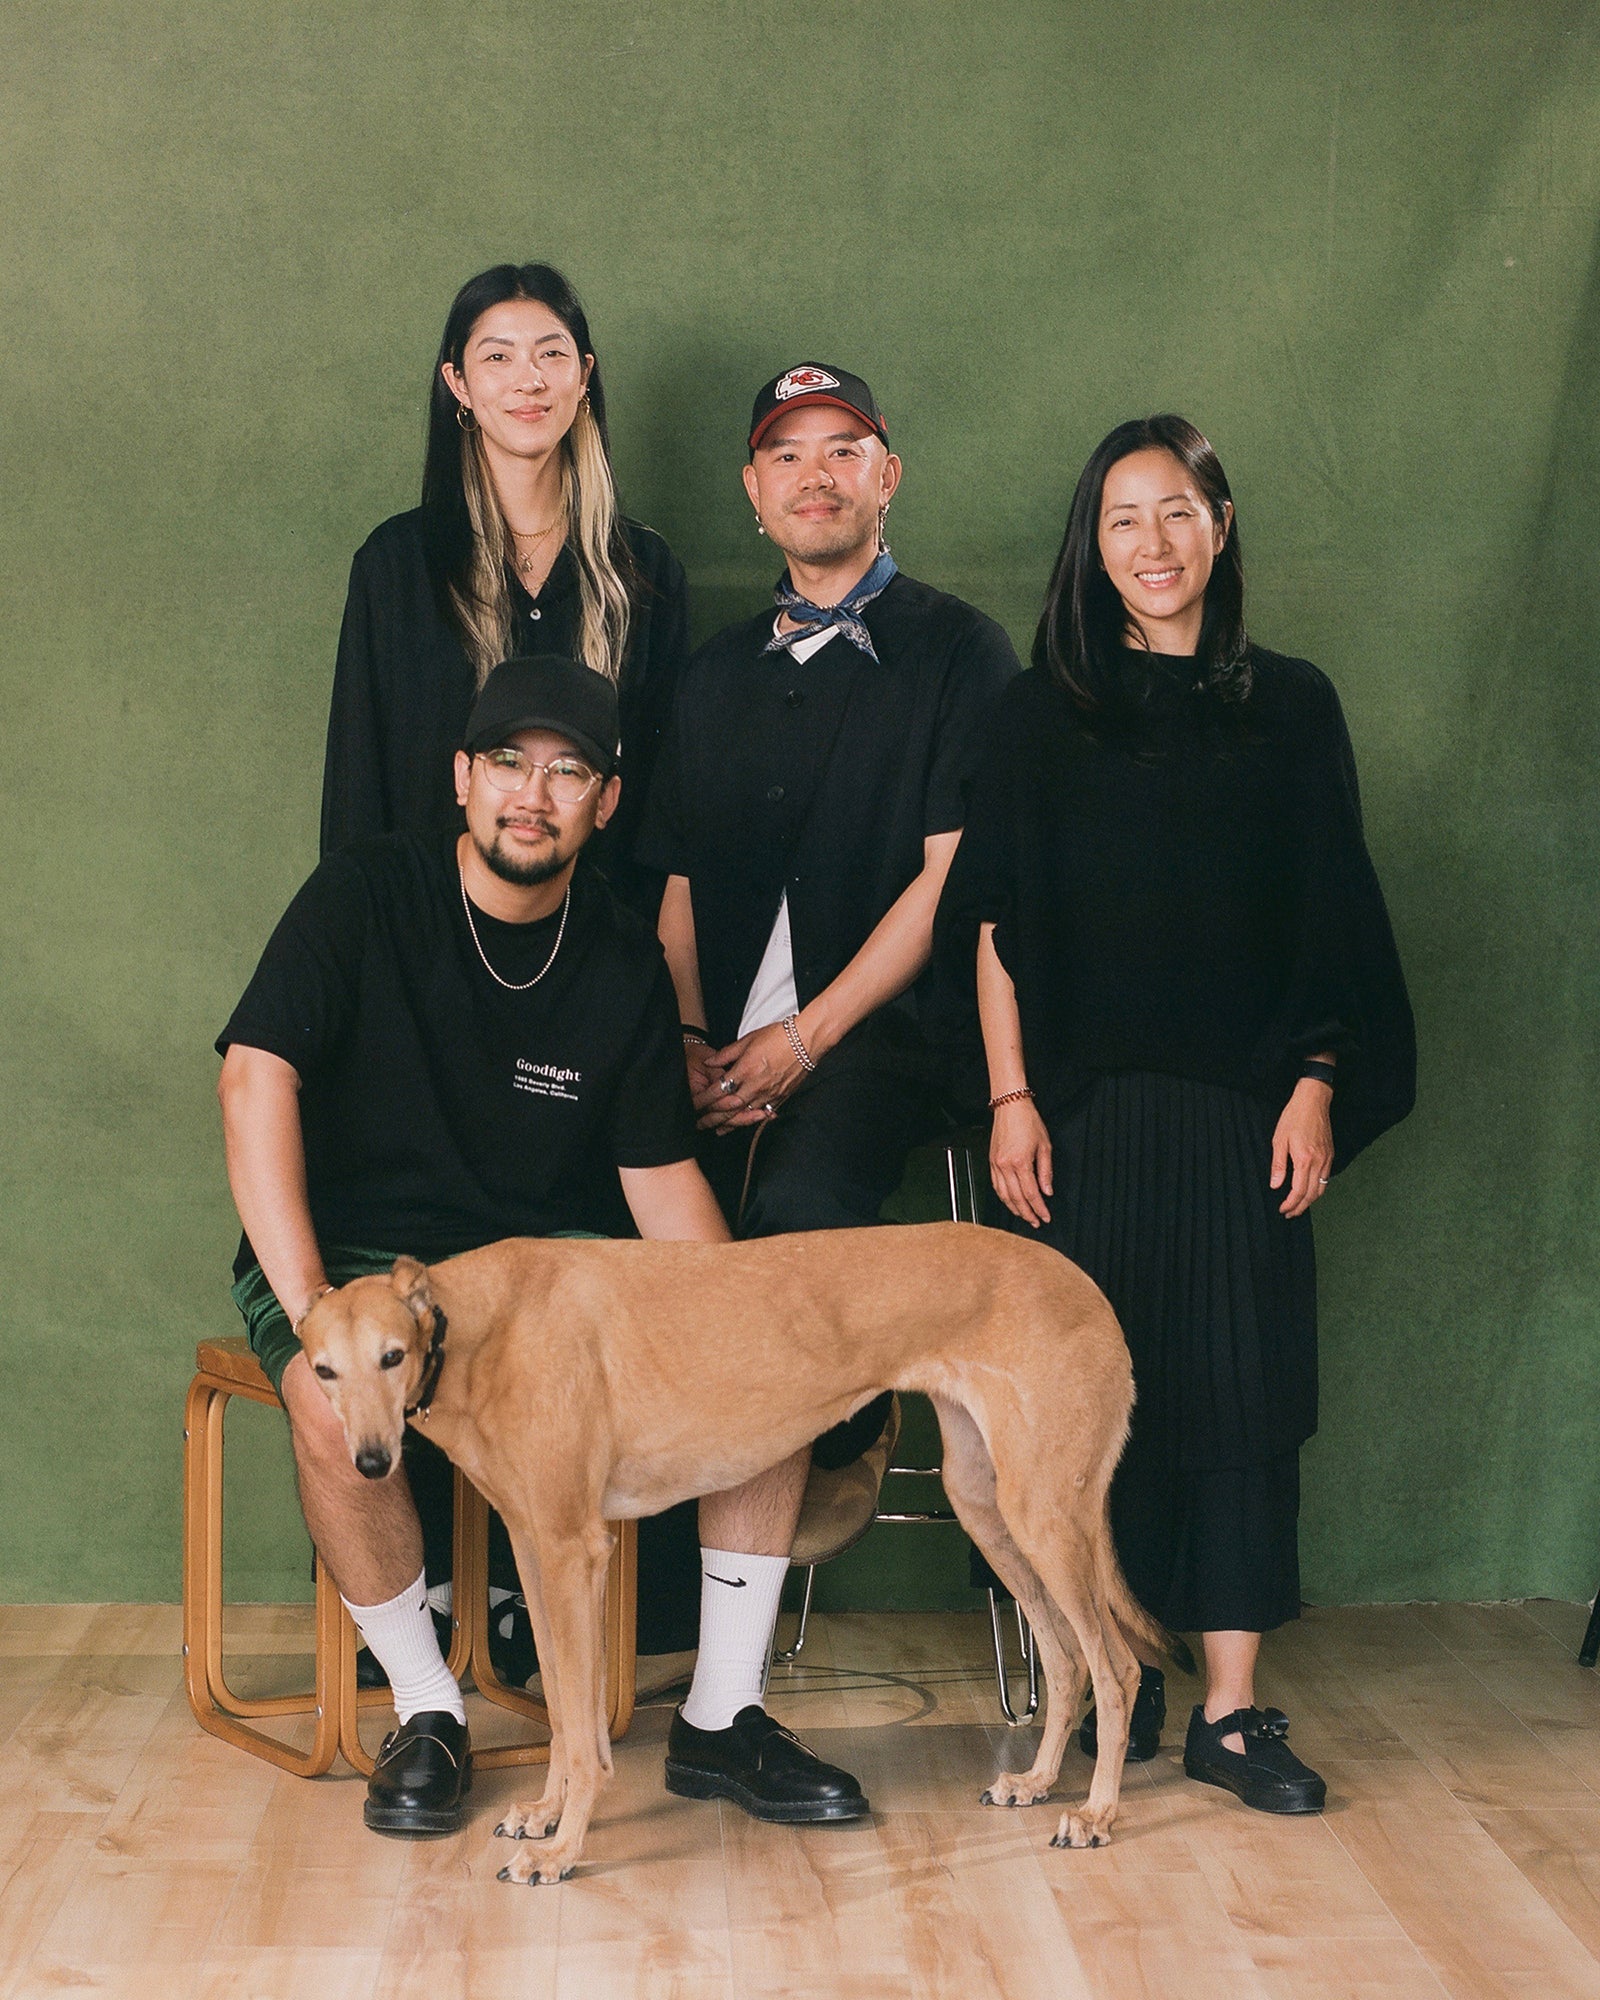 Four stylish asians and a dog pose in front of a green backdrop.